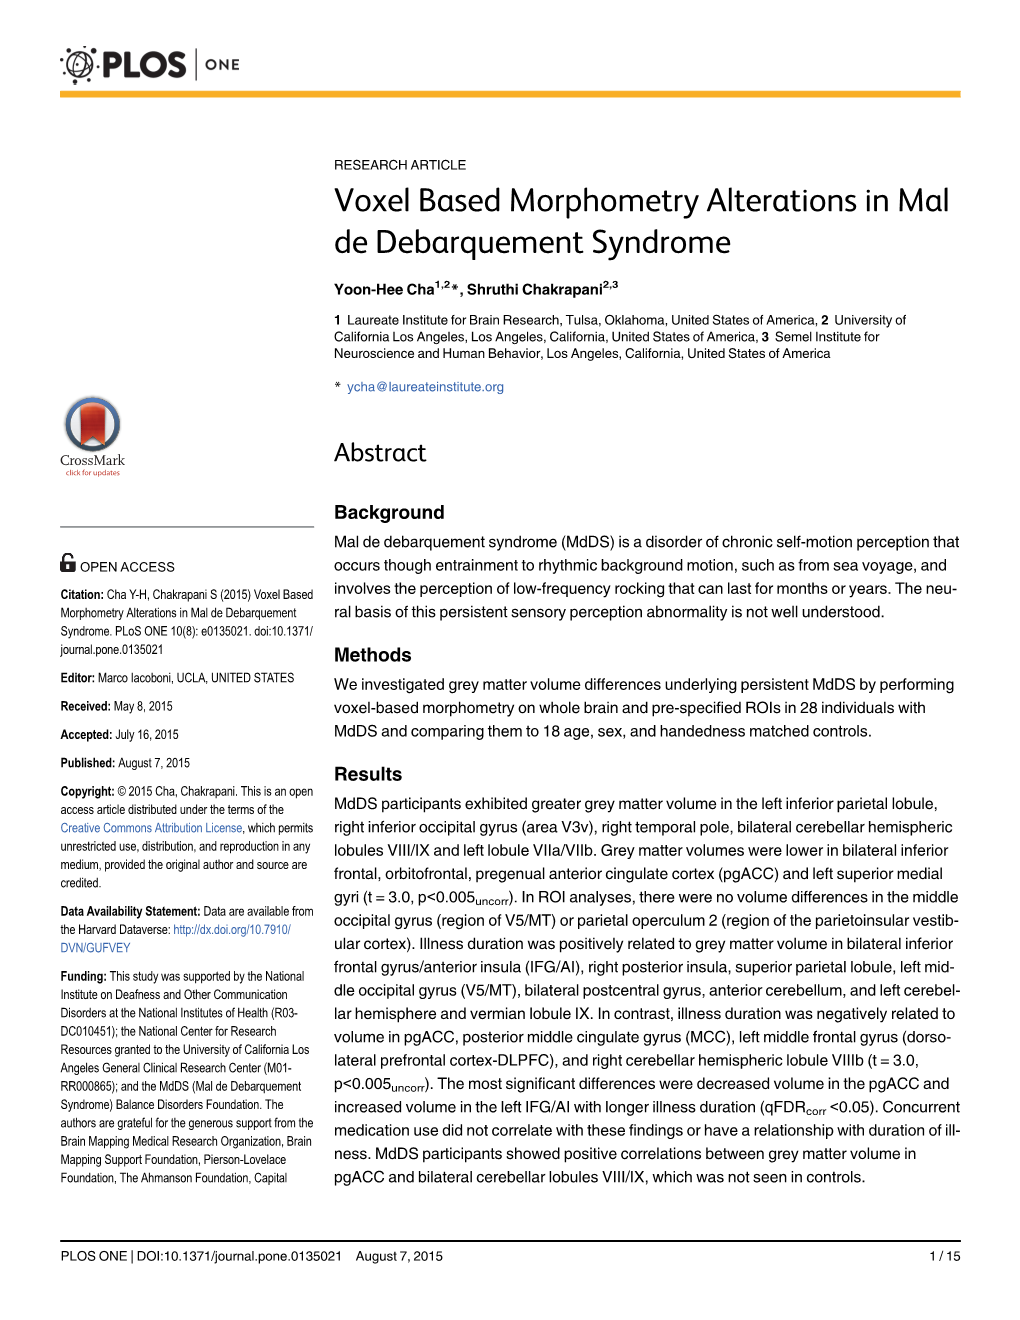 Voxel Based Morphometry Alterations in Mal De Debarquement Syndrome